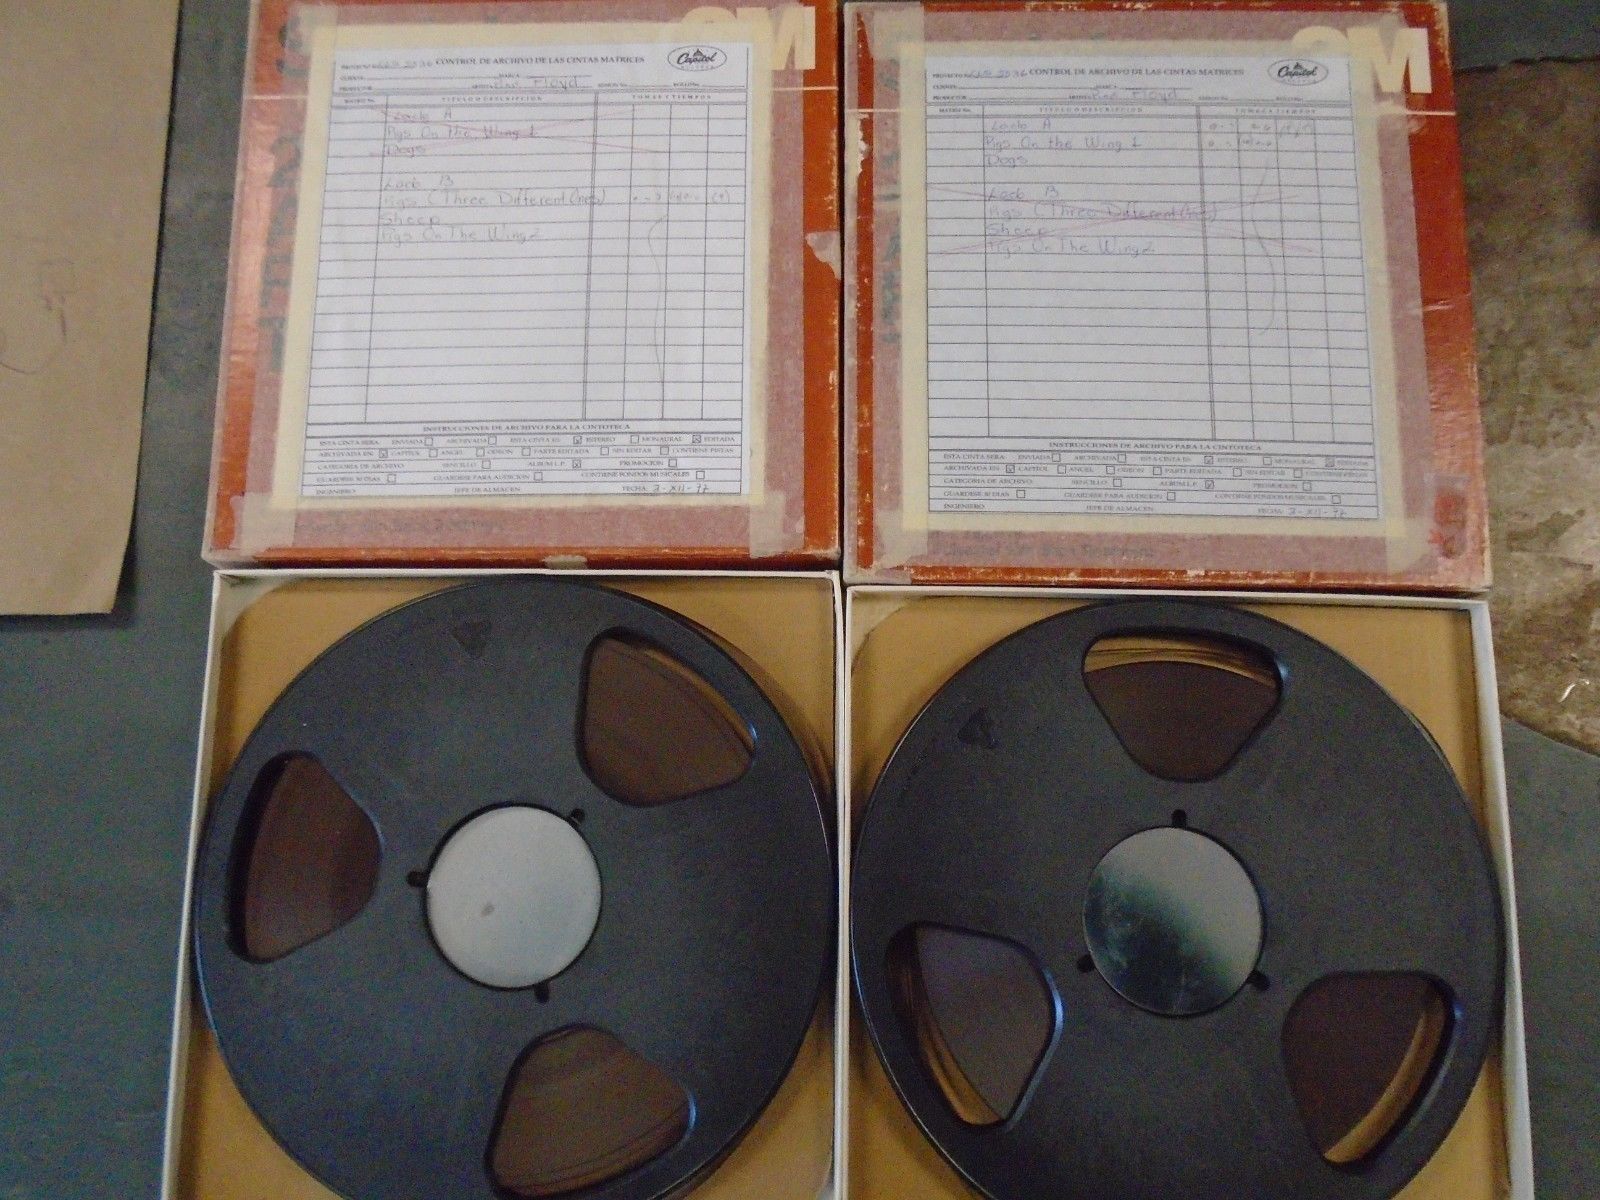  PINK FLOYD ANIMALS 15ips 2 TRACK Reel To Reel Record MASTER  TAPE - auction details